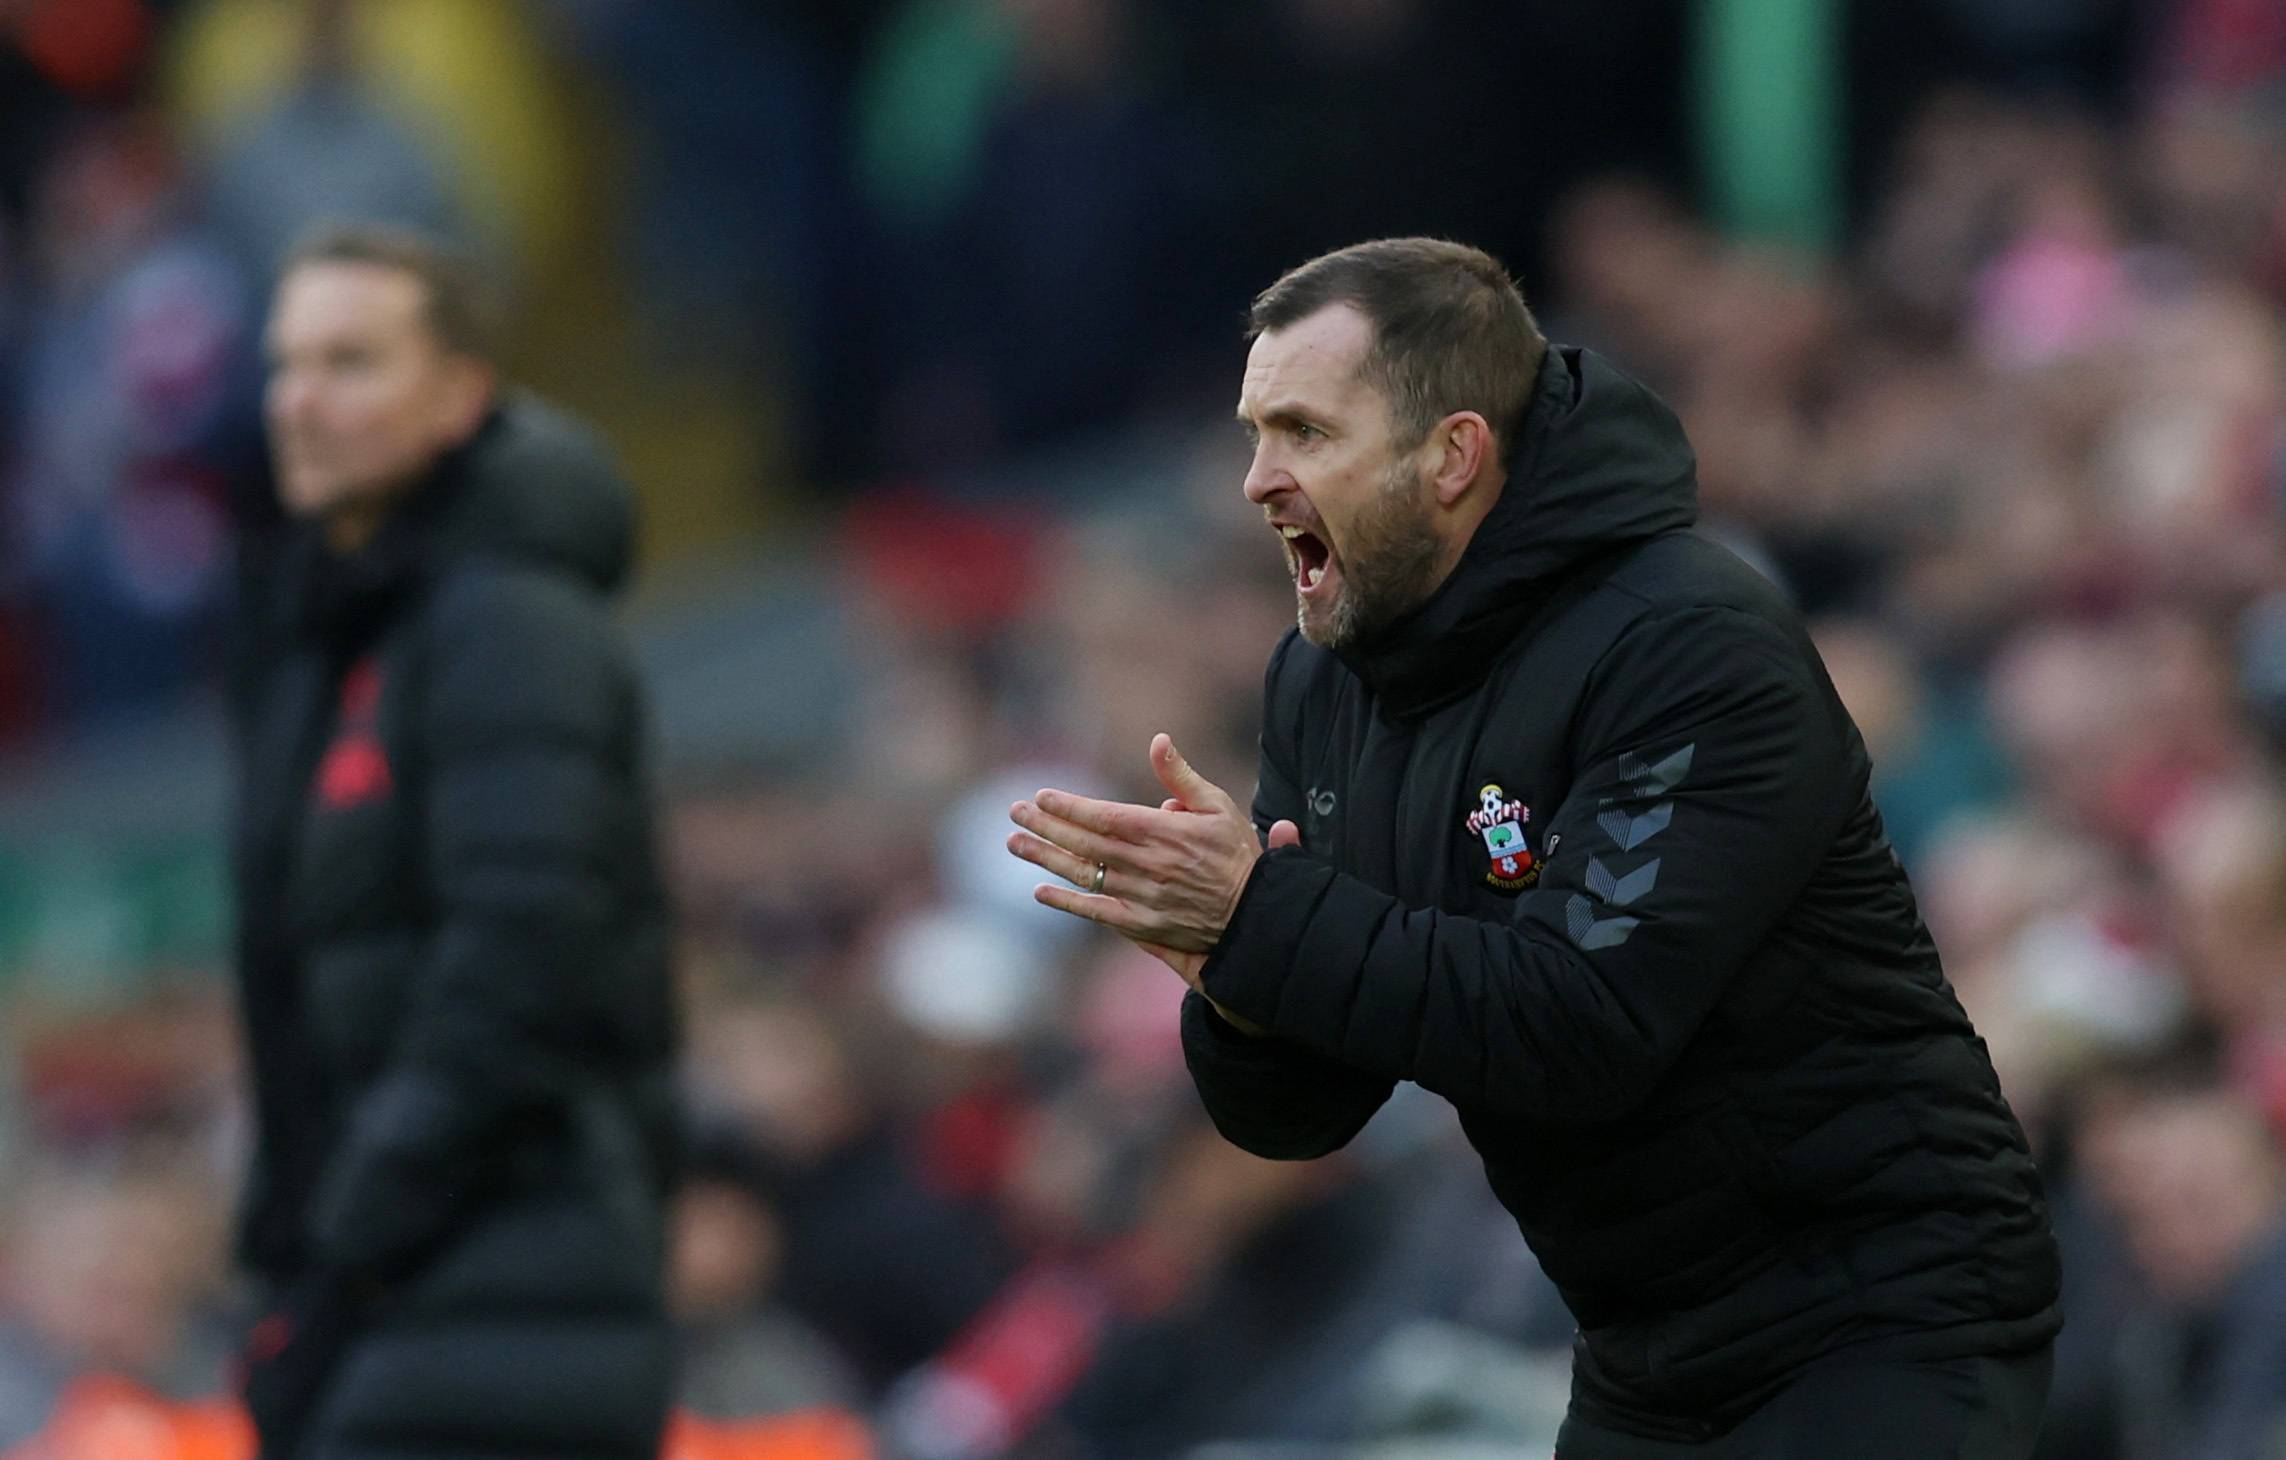 Southampton manager Nathan Jones encouraging his team against Liverpool